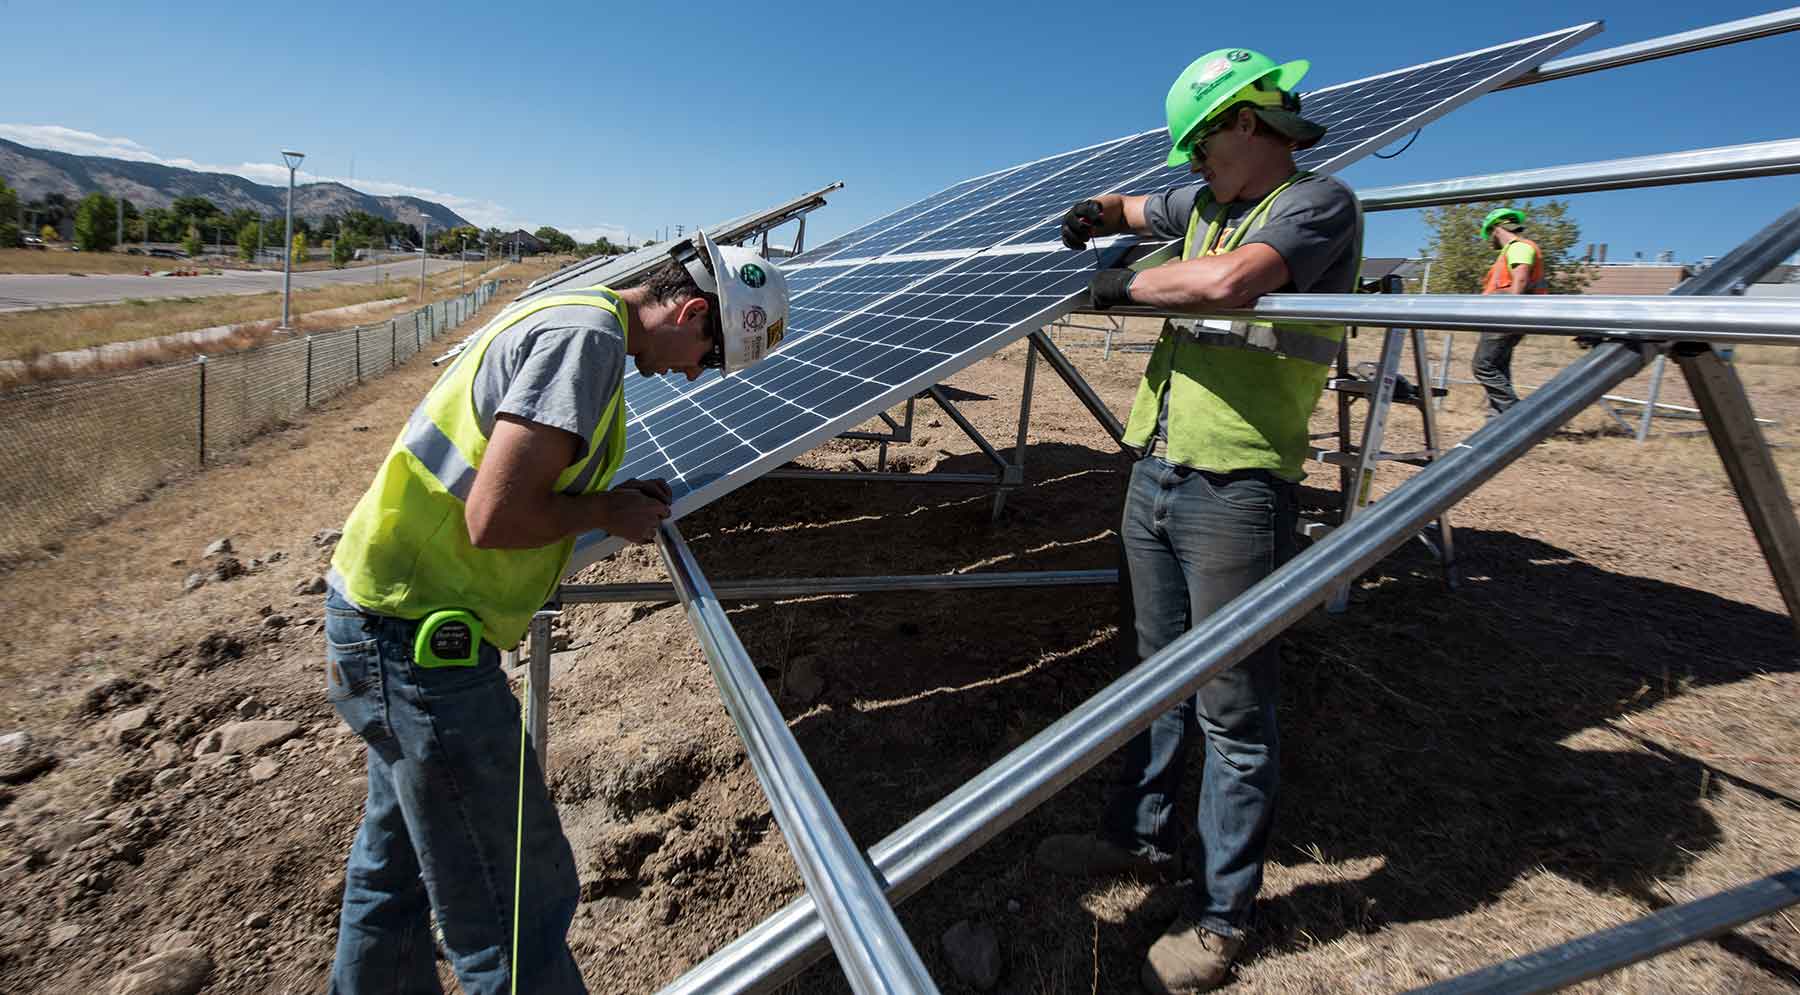 Workers install PV modules at NREL's new solar array field.